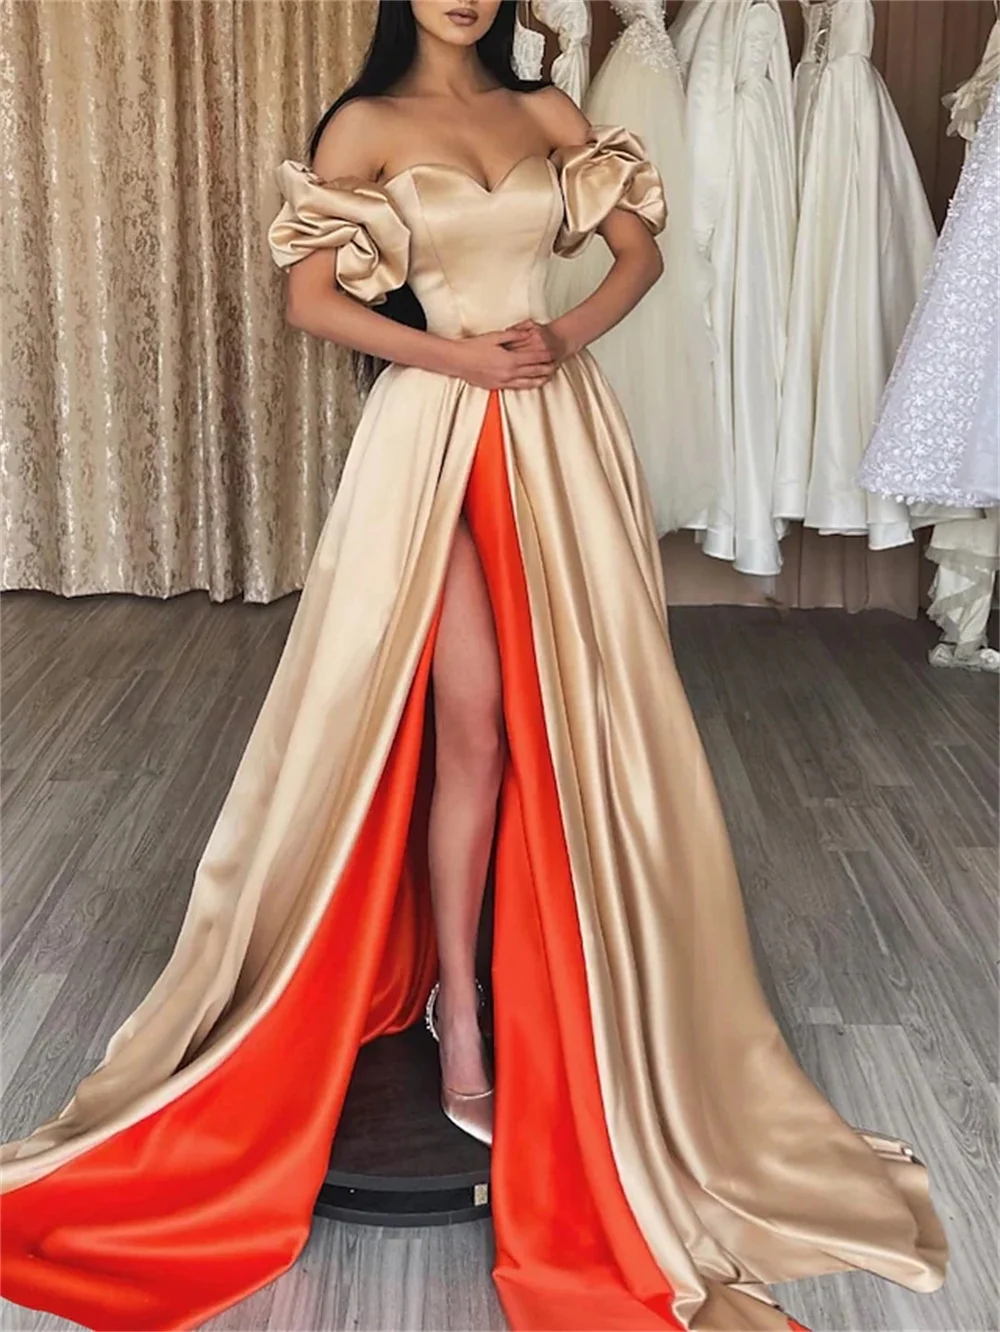 

Sexy High Slit Satin Party Evening Dresses Sweetheart Puff Sleeves Formal Prom Dresses Gowns Vestidos De Fiesta Robe De Soiree